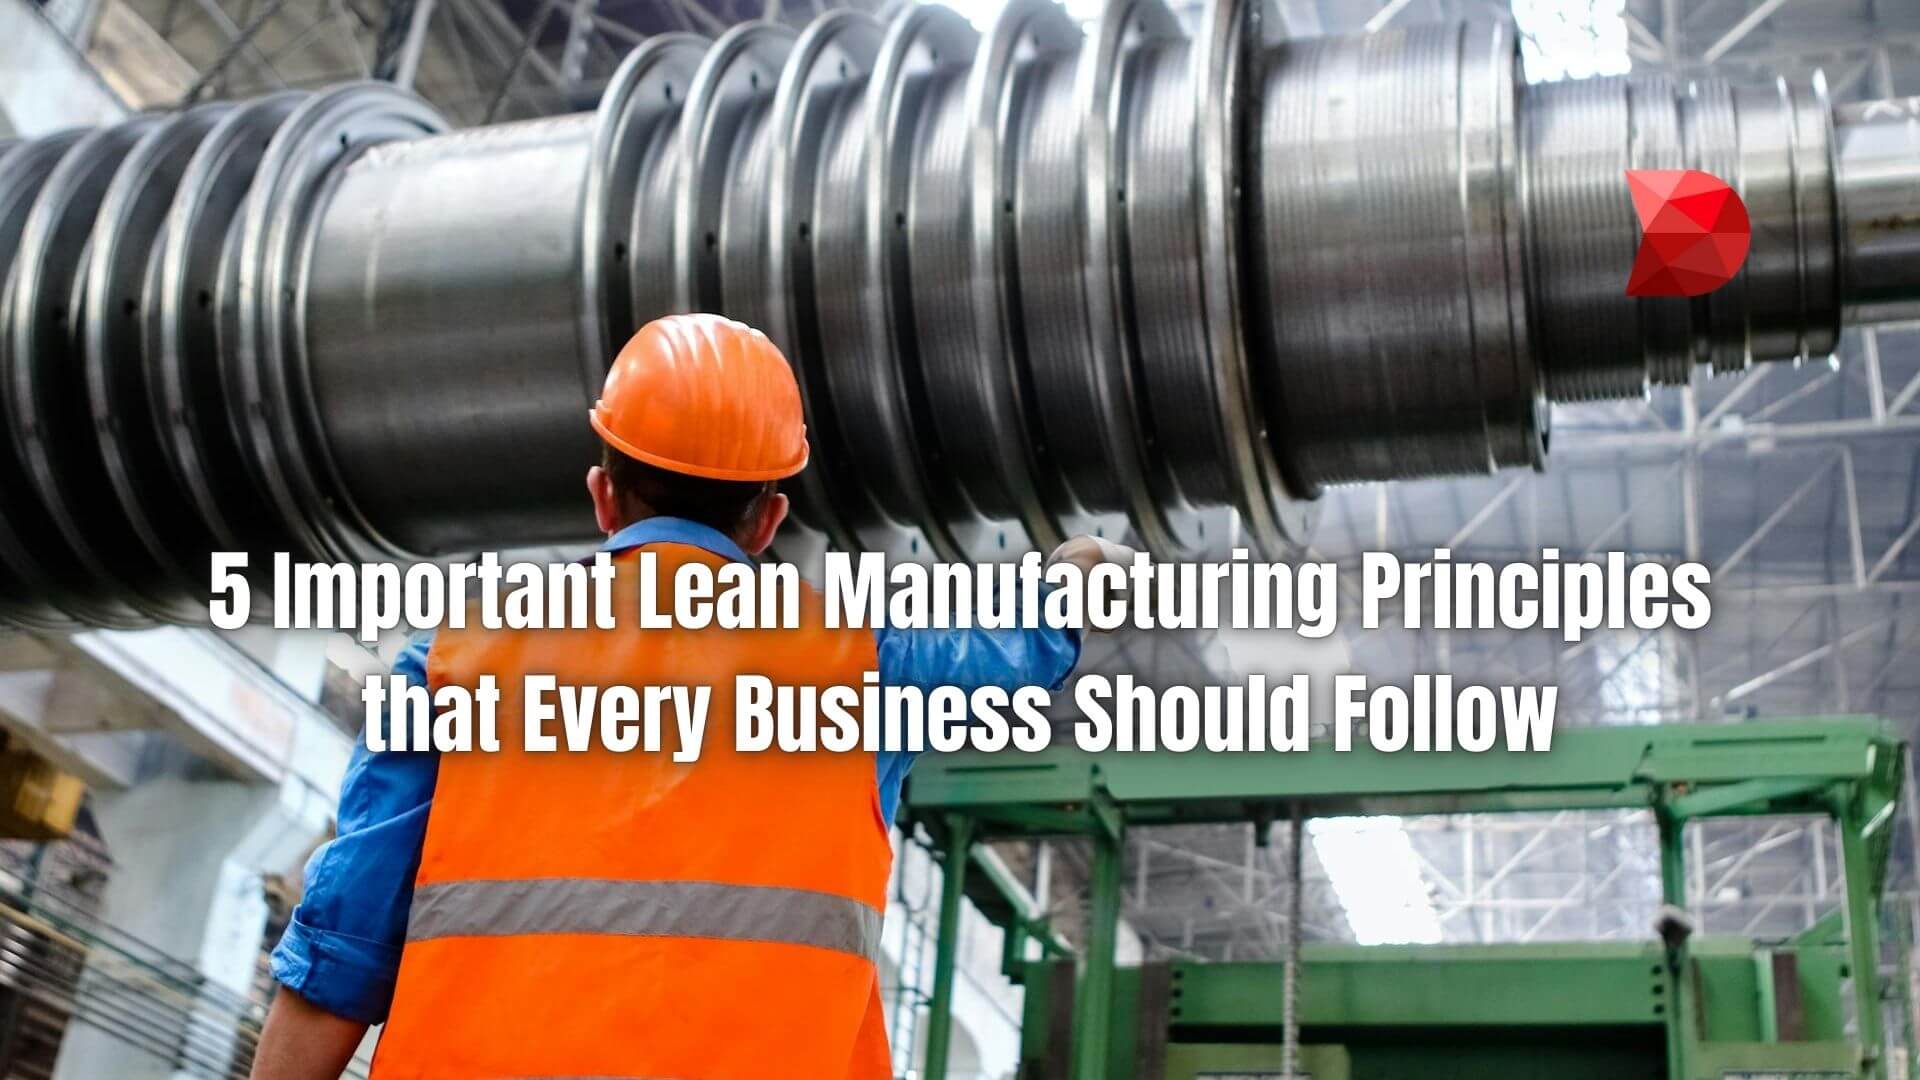 Revolutionize your operations! Click here to learn the 5 key lean manufacturing principles and take your business to new heights.